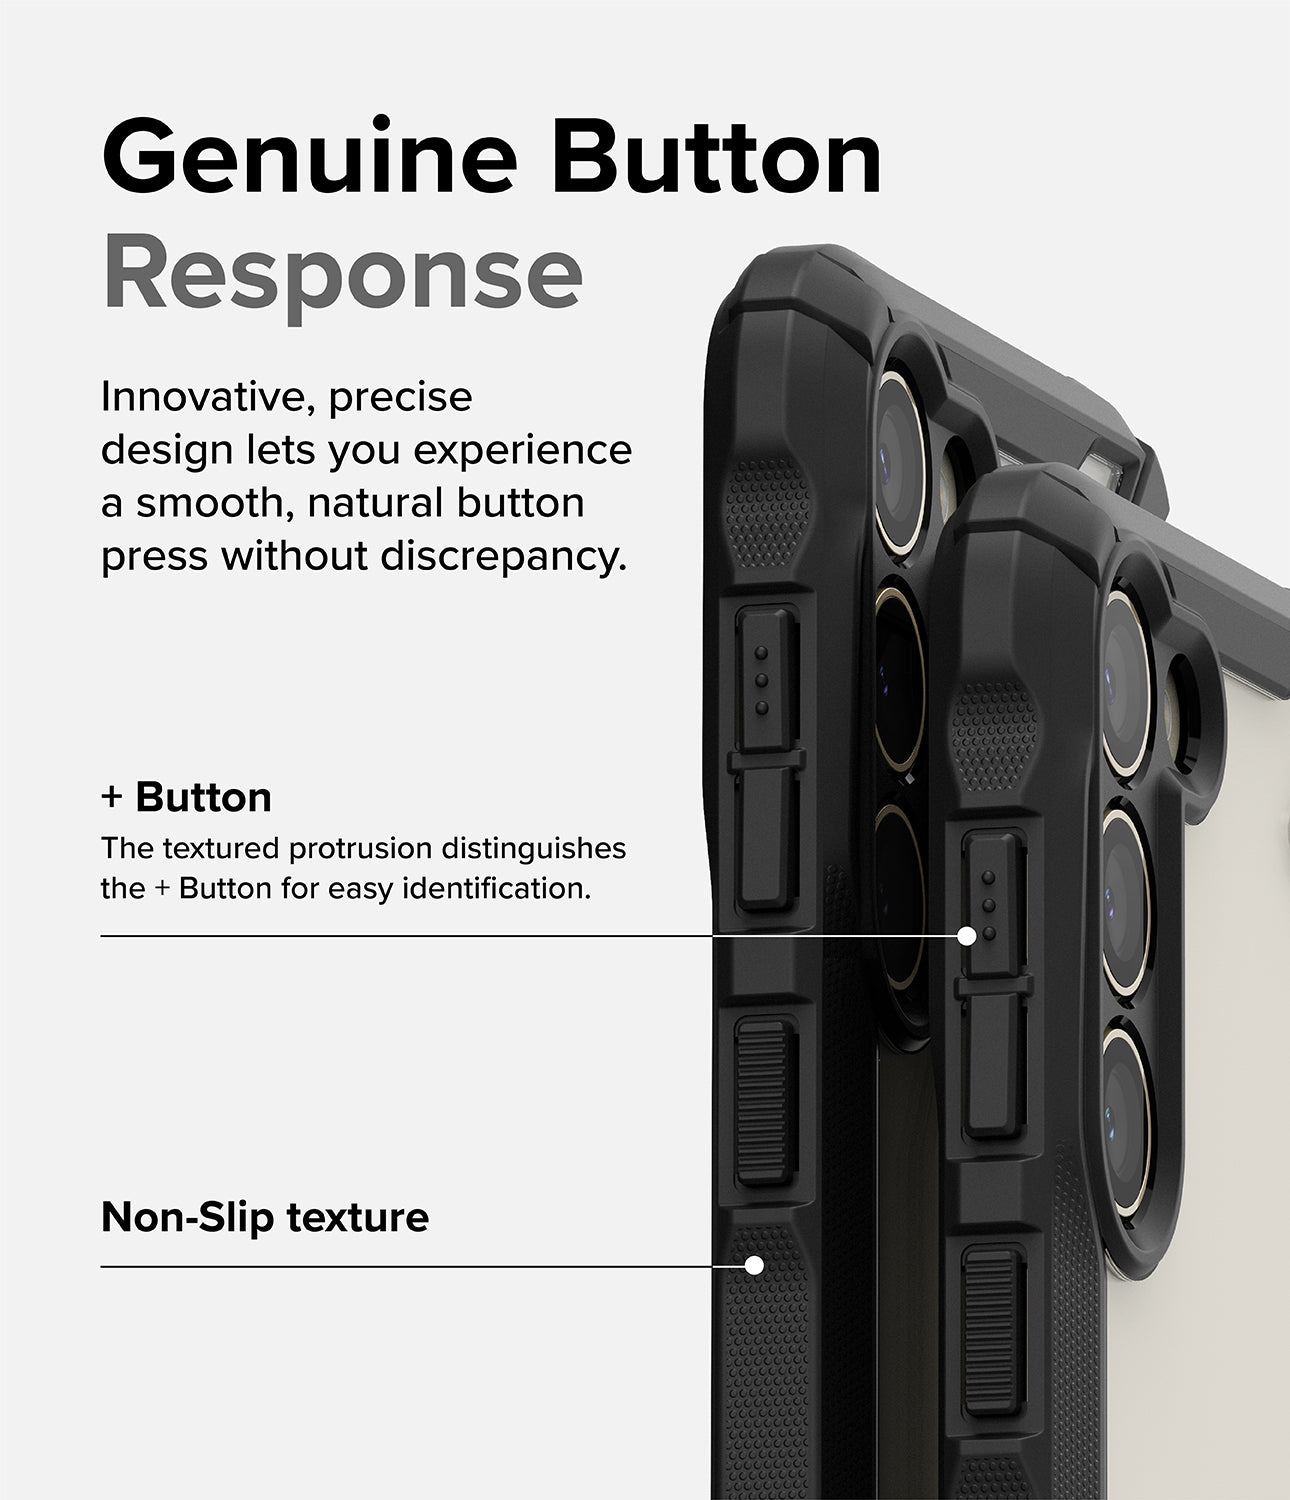 Galaxy S23 Plus Case | Fusion-X - Black - Genuine Button Response. Innovative, precise design lets you experience a smooth, natural button press without discrepancy. + Button. The textured protrusion distinguishes the + Button for easy identification. Non-Slip texture.